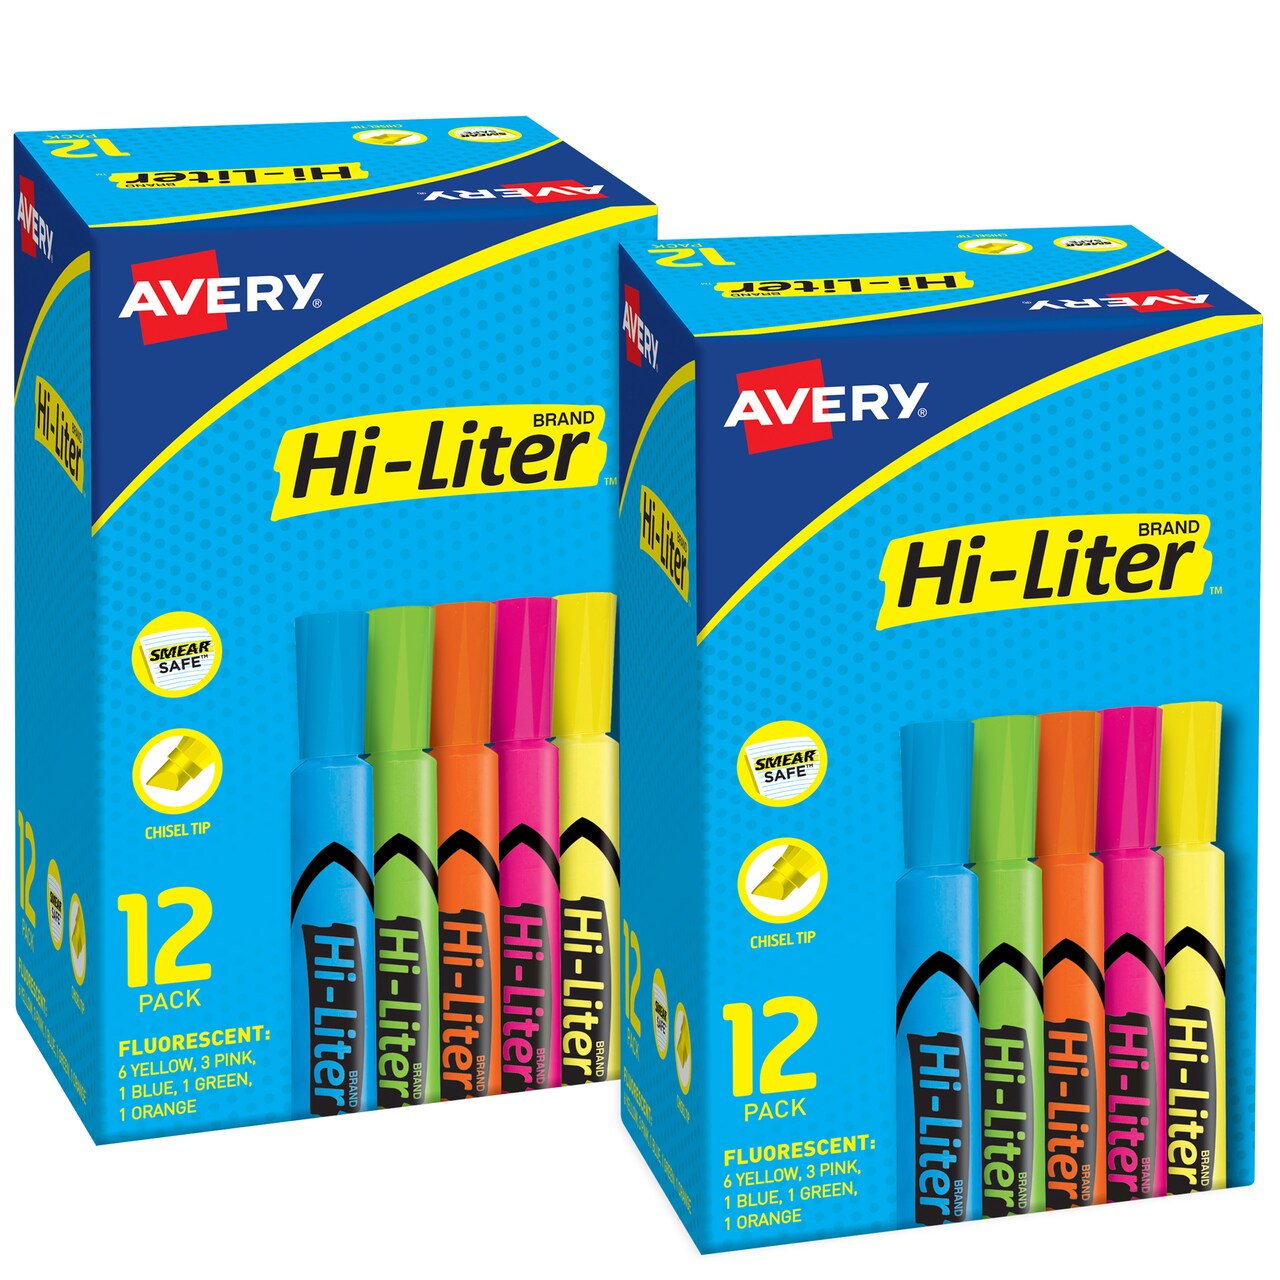 Avery Hi-Liter Desk-Style Highlighters, Chisel Tip, 12 Highlighters,  Assorted Colors, 2 Packs (25601)